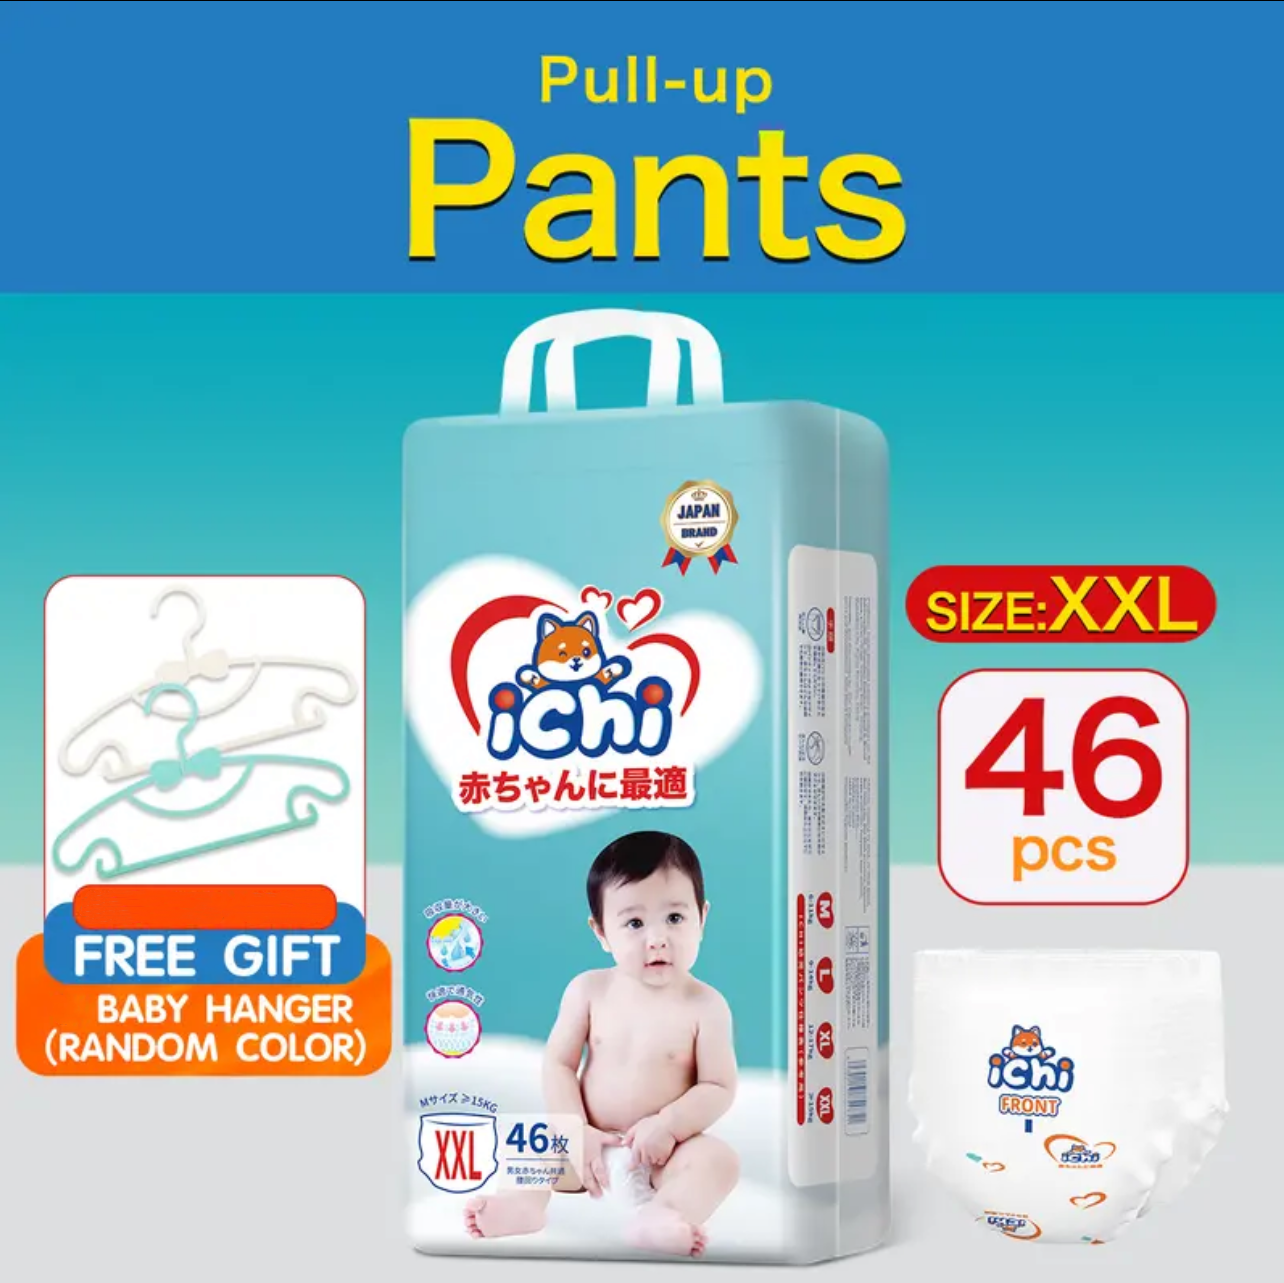 When should baby use baby diapers and baby pull-up pants?